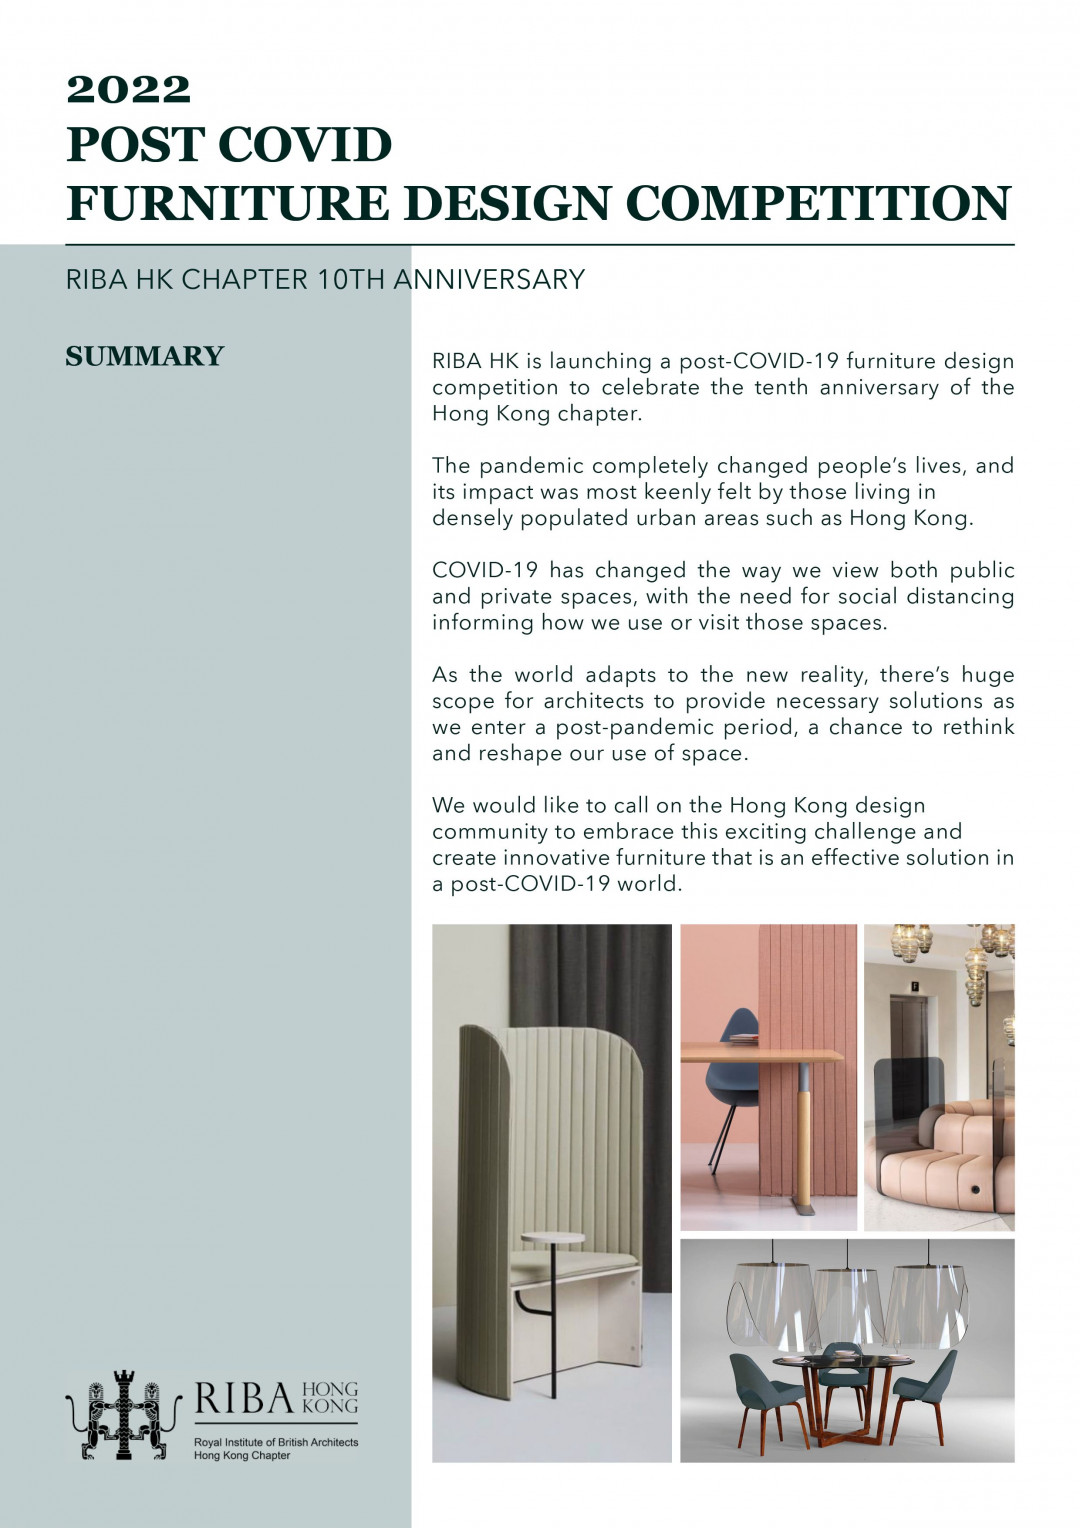 CALL FOR ENTRIES!  2022 POST COVID FURNITURE DESIGN COMPETITION SUBMISSION DEADLINE 17TH SEPTEMBER 2022